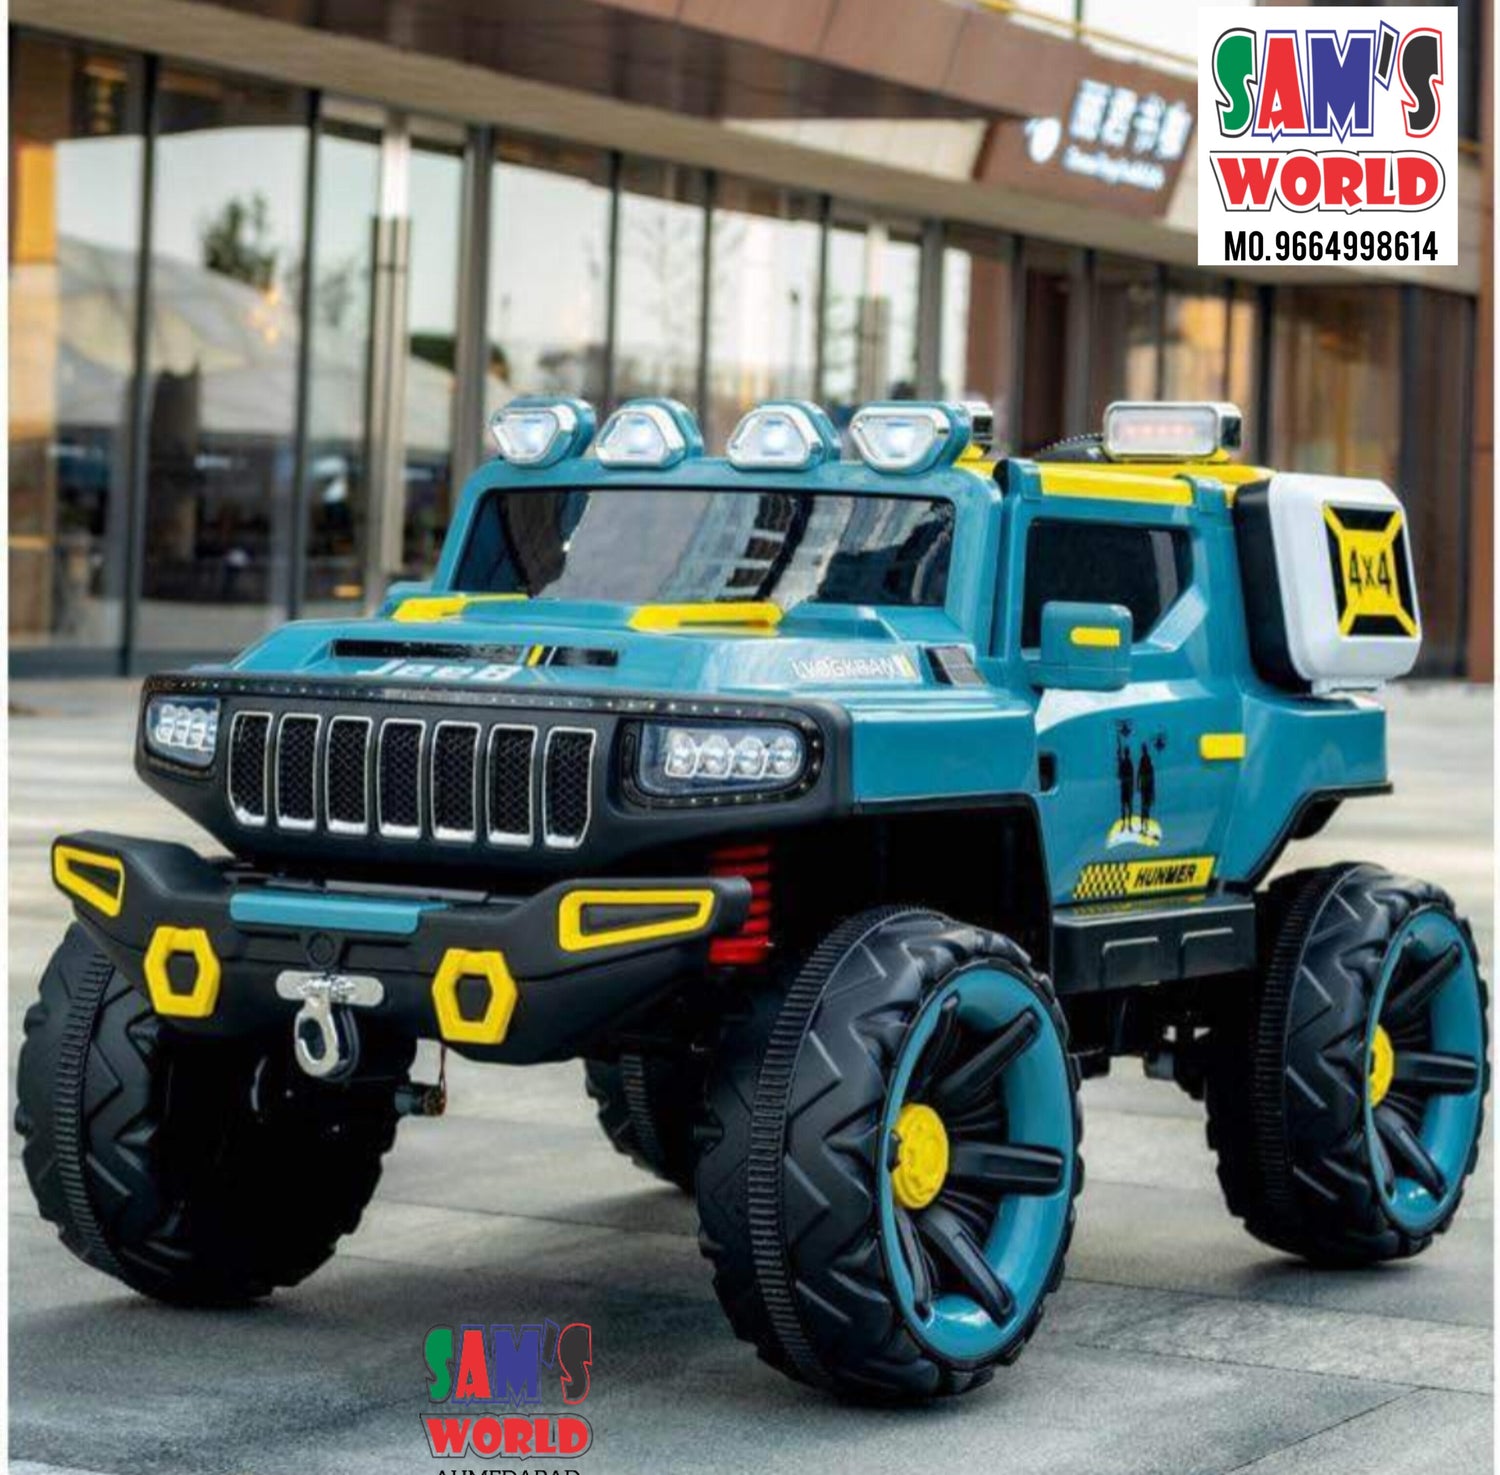 Jumbo big size ride on military jeep car for kids | age 1 To 14 years children | make in India | 2 seater - samstoy.in